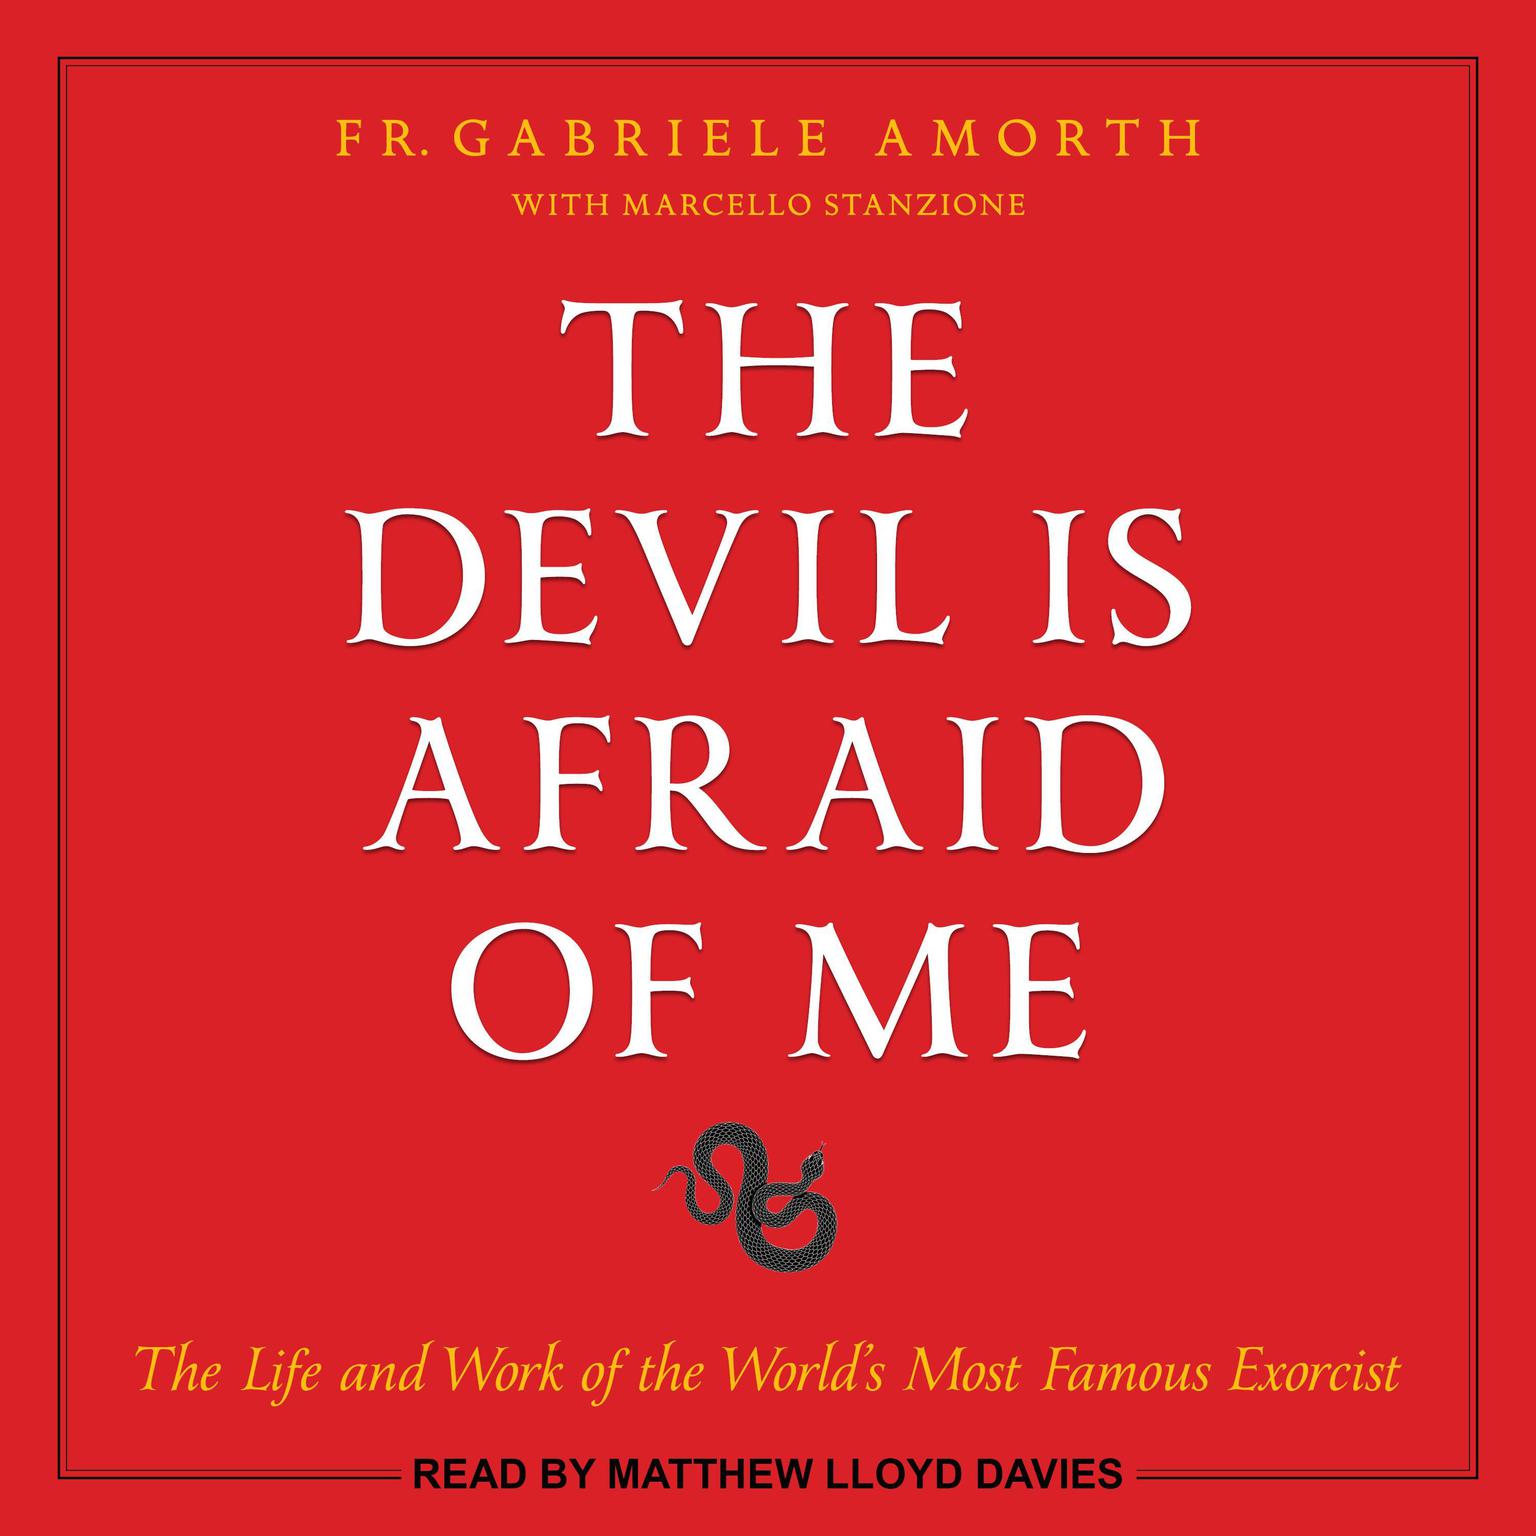 The Devil is Afraid of Me: The Life and Work of the Worlds Most Famous Exorcist Audiobook, by Fr. Gabriele Amorth